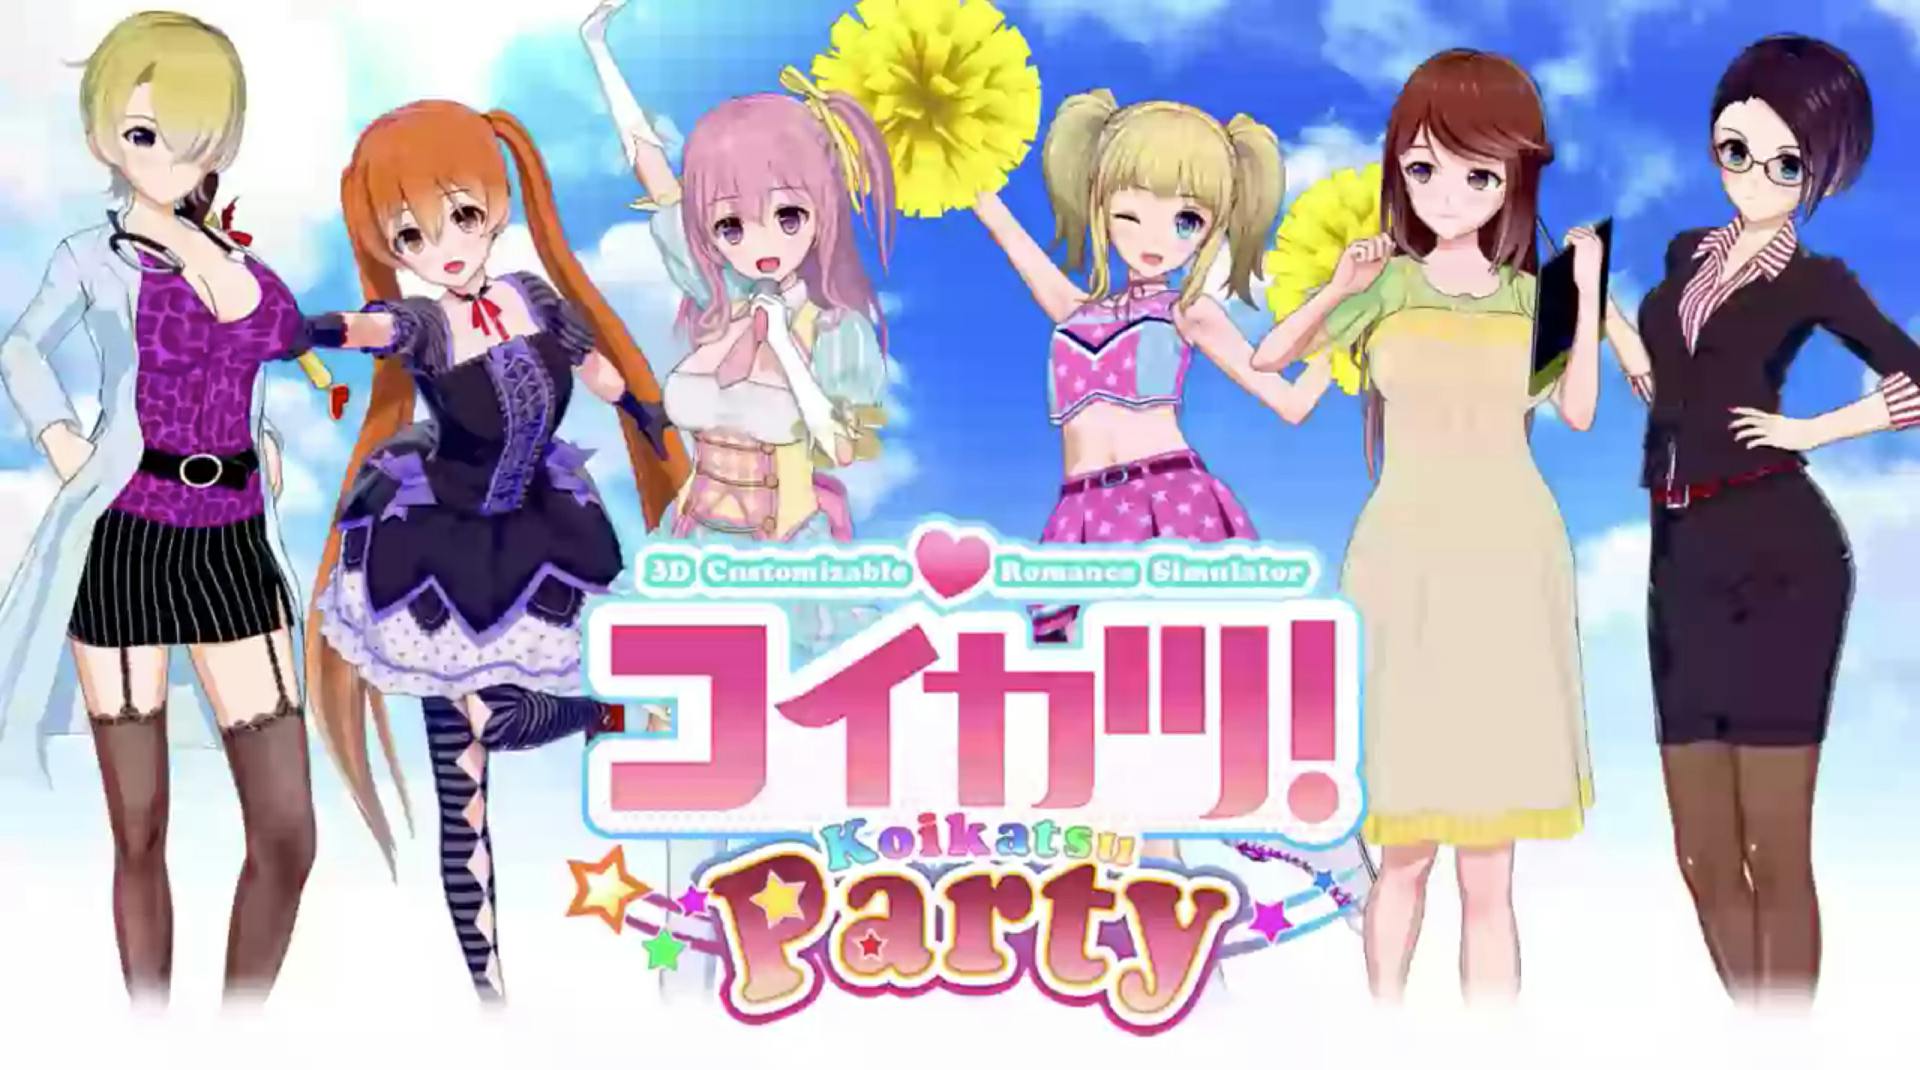 A promotional image for Koikatsu Party with six anime girls.